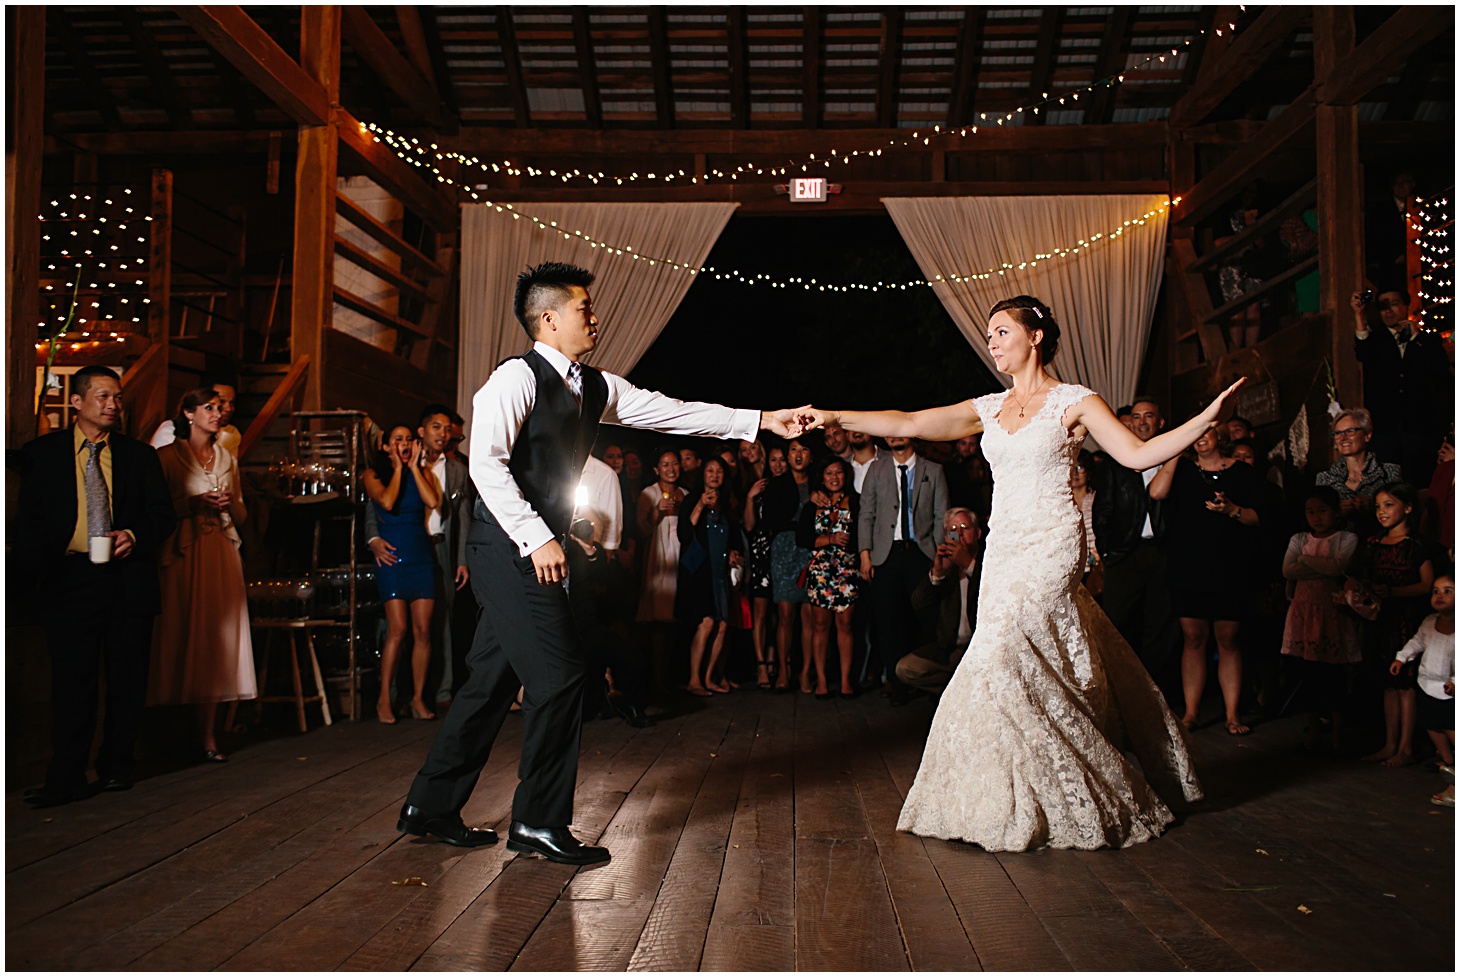 Rustic Floral Wedding at Rocklands Farm & Winery by Sarah Bradshaw Photography_0046